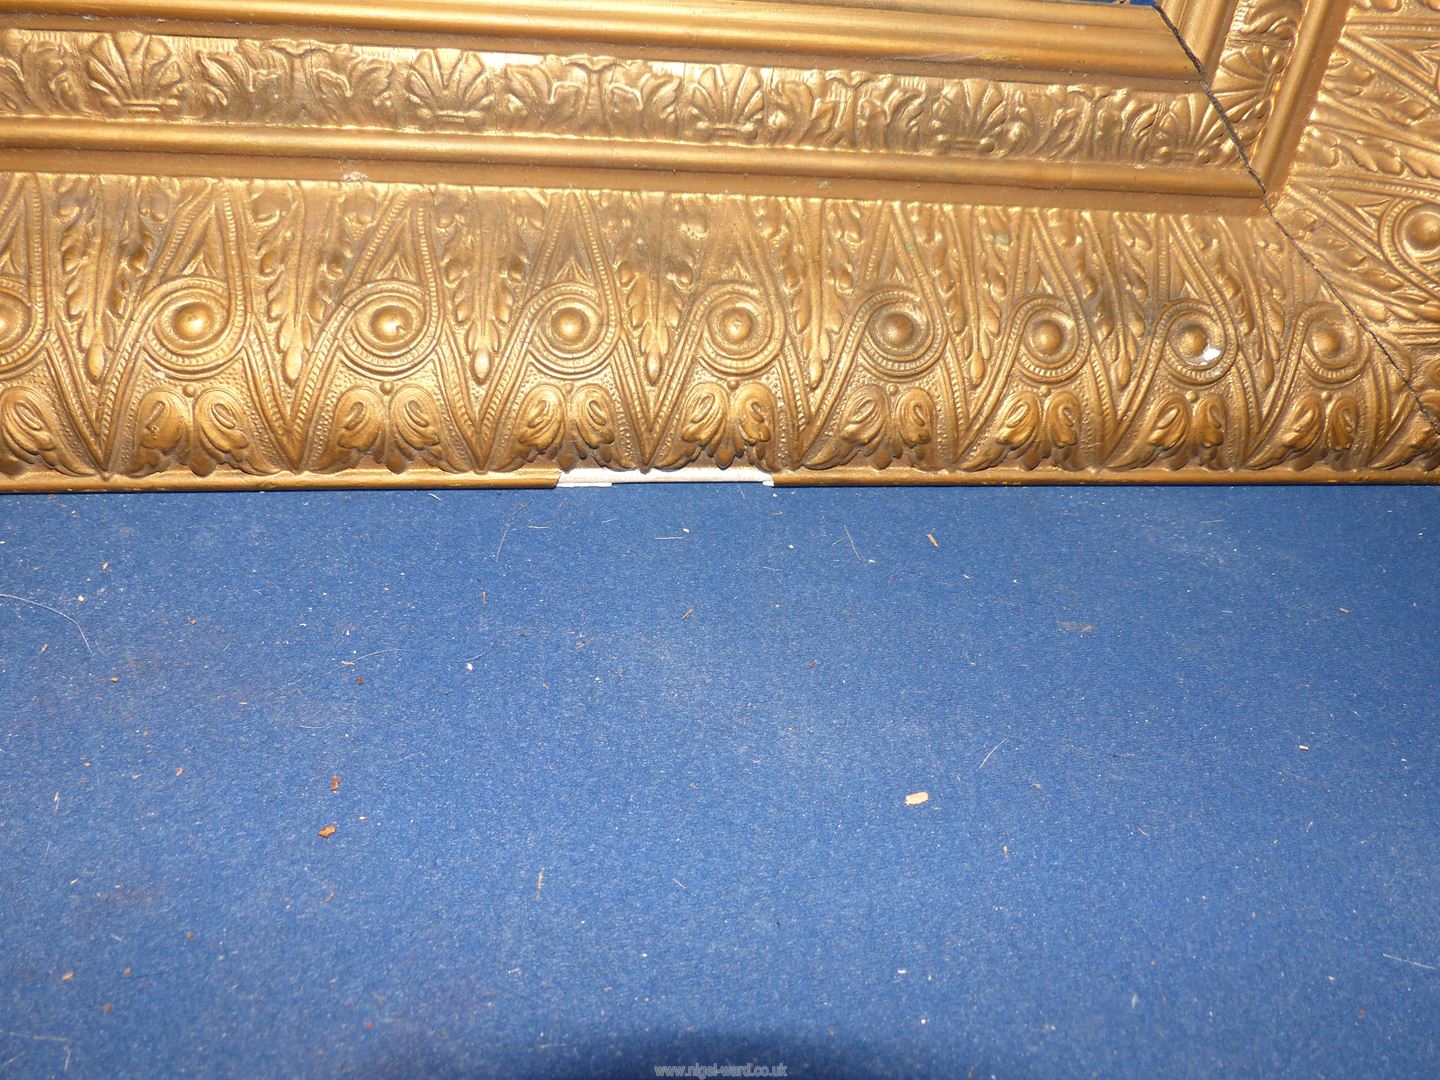 A large heavy ornate gilt frame, overall 2' 6" x 2' 2", aperture 1' 10 1/2" x 1' 6 1/2", - Image 3 of 5